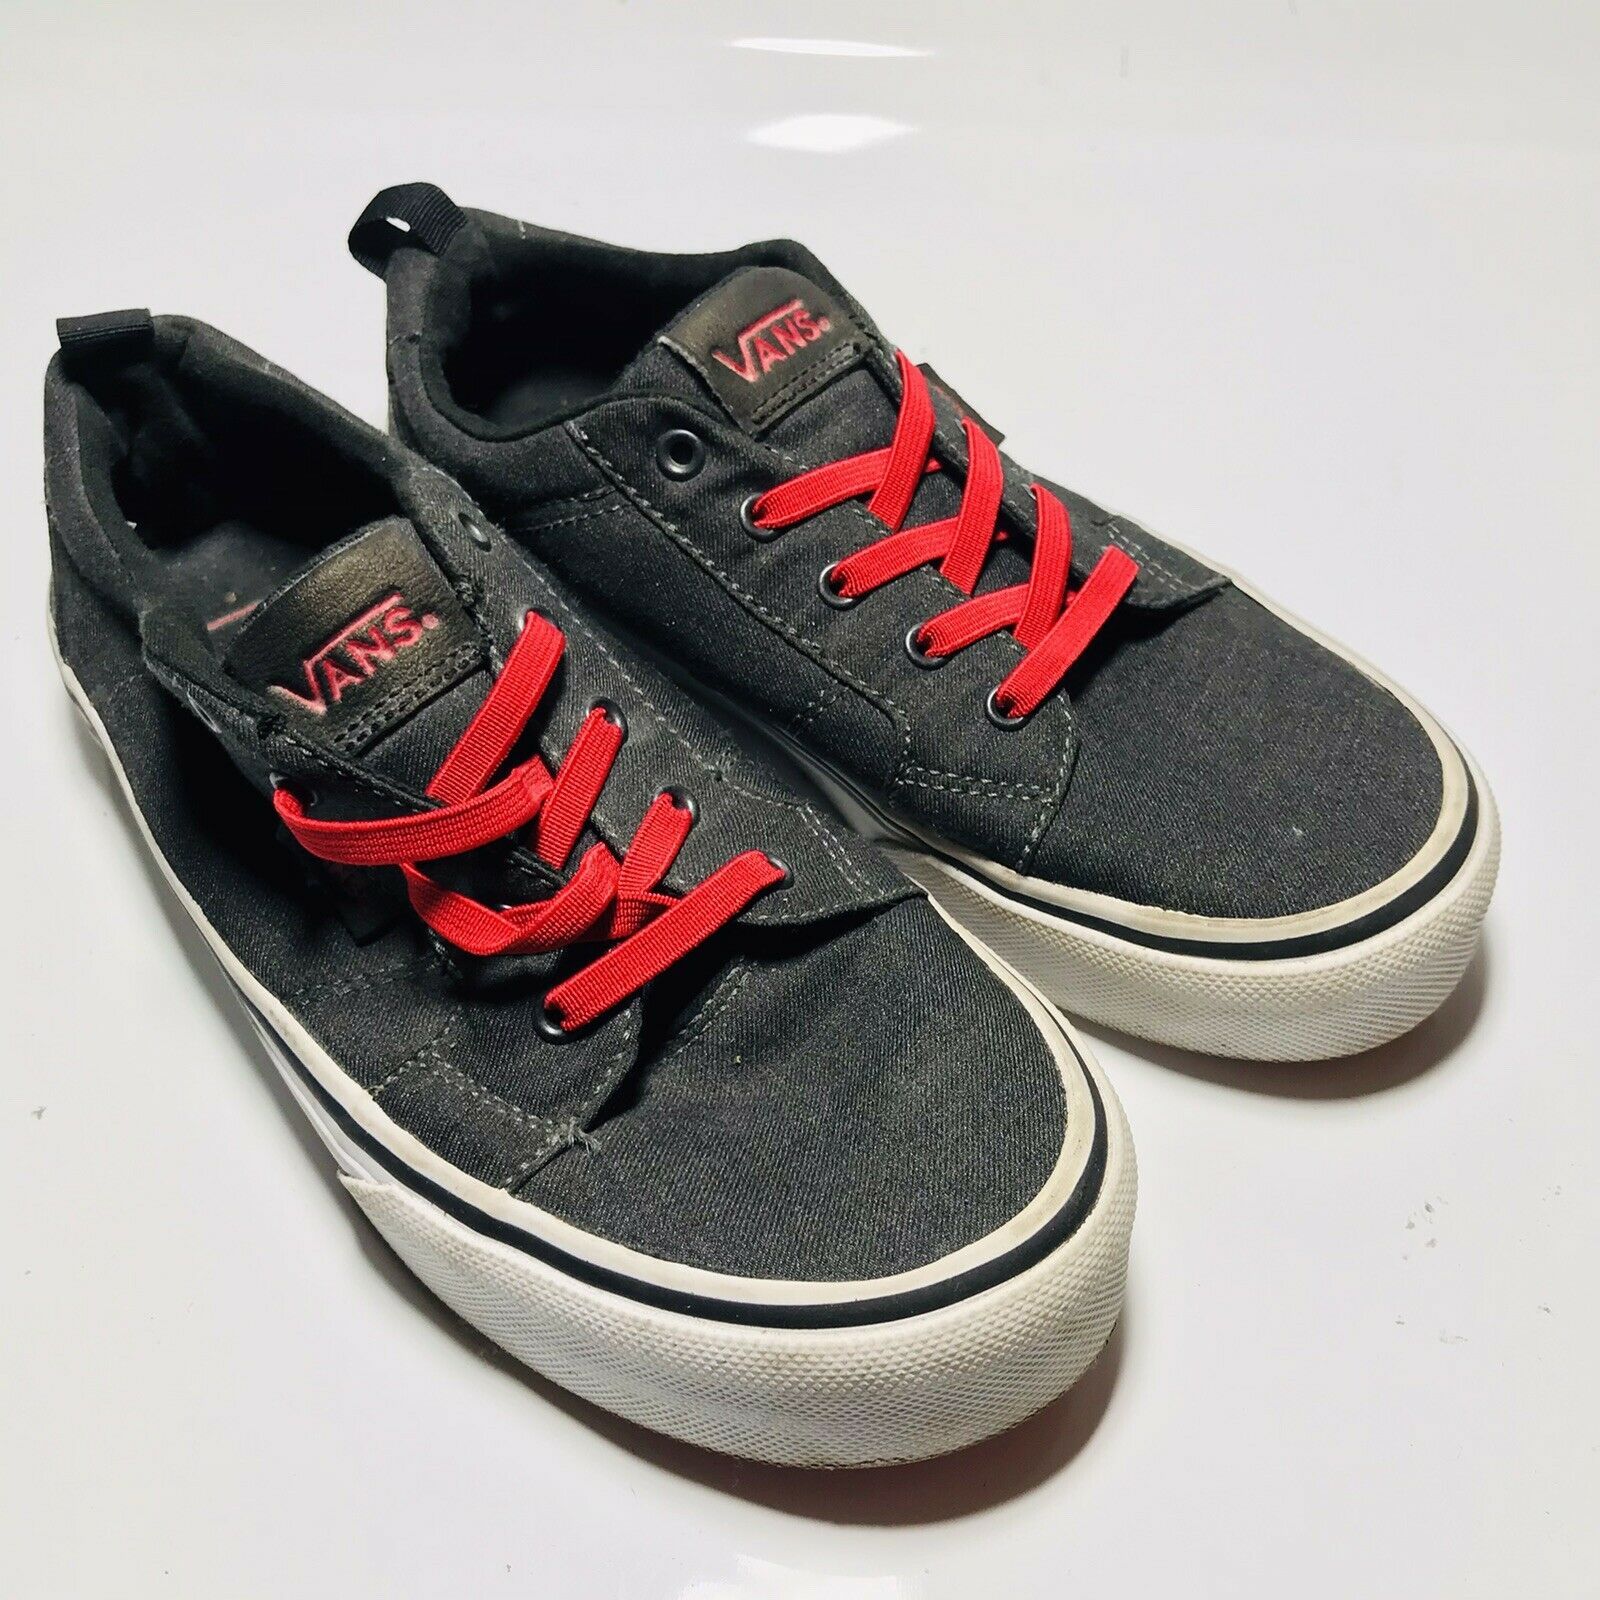 Vans Off The Wall Skate Sneaker Black Canvas Denim Youth Size 3 721454 - £15.97 GBP